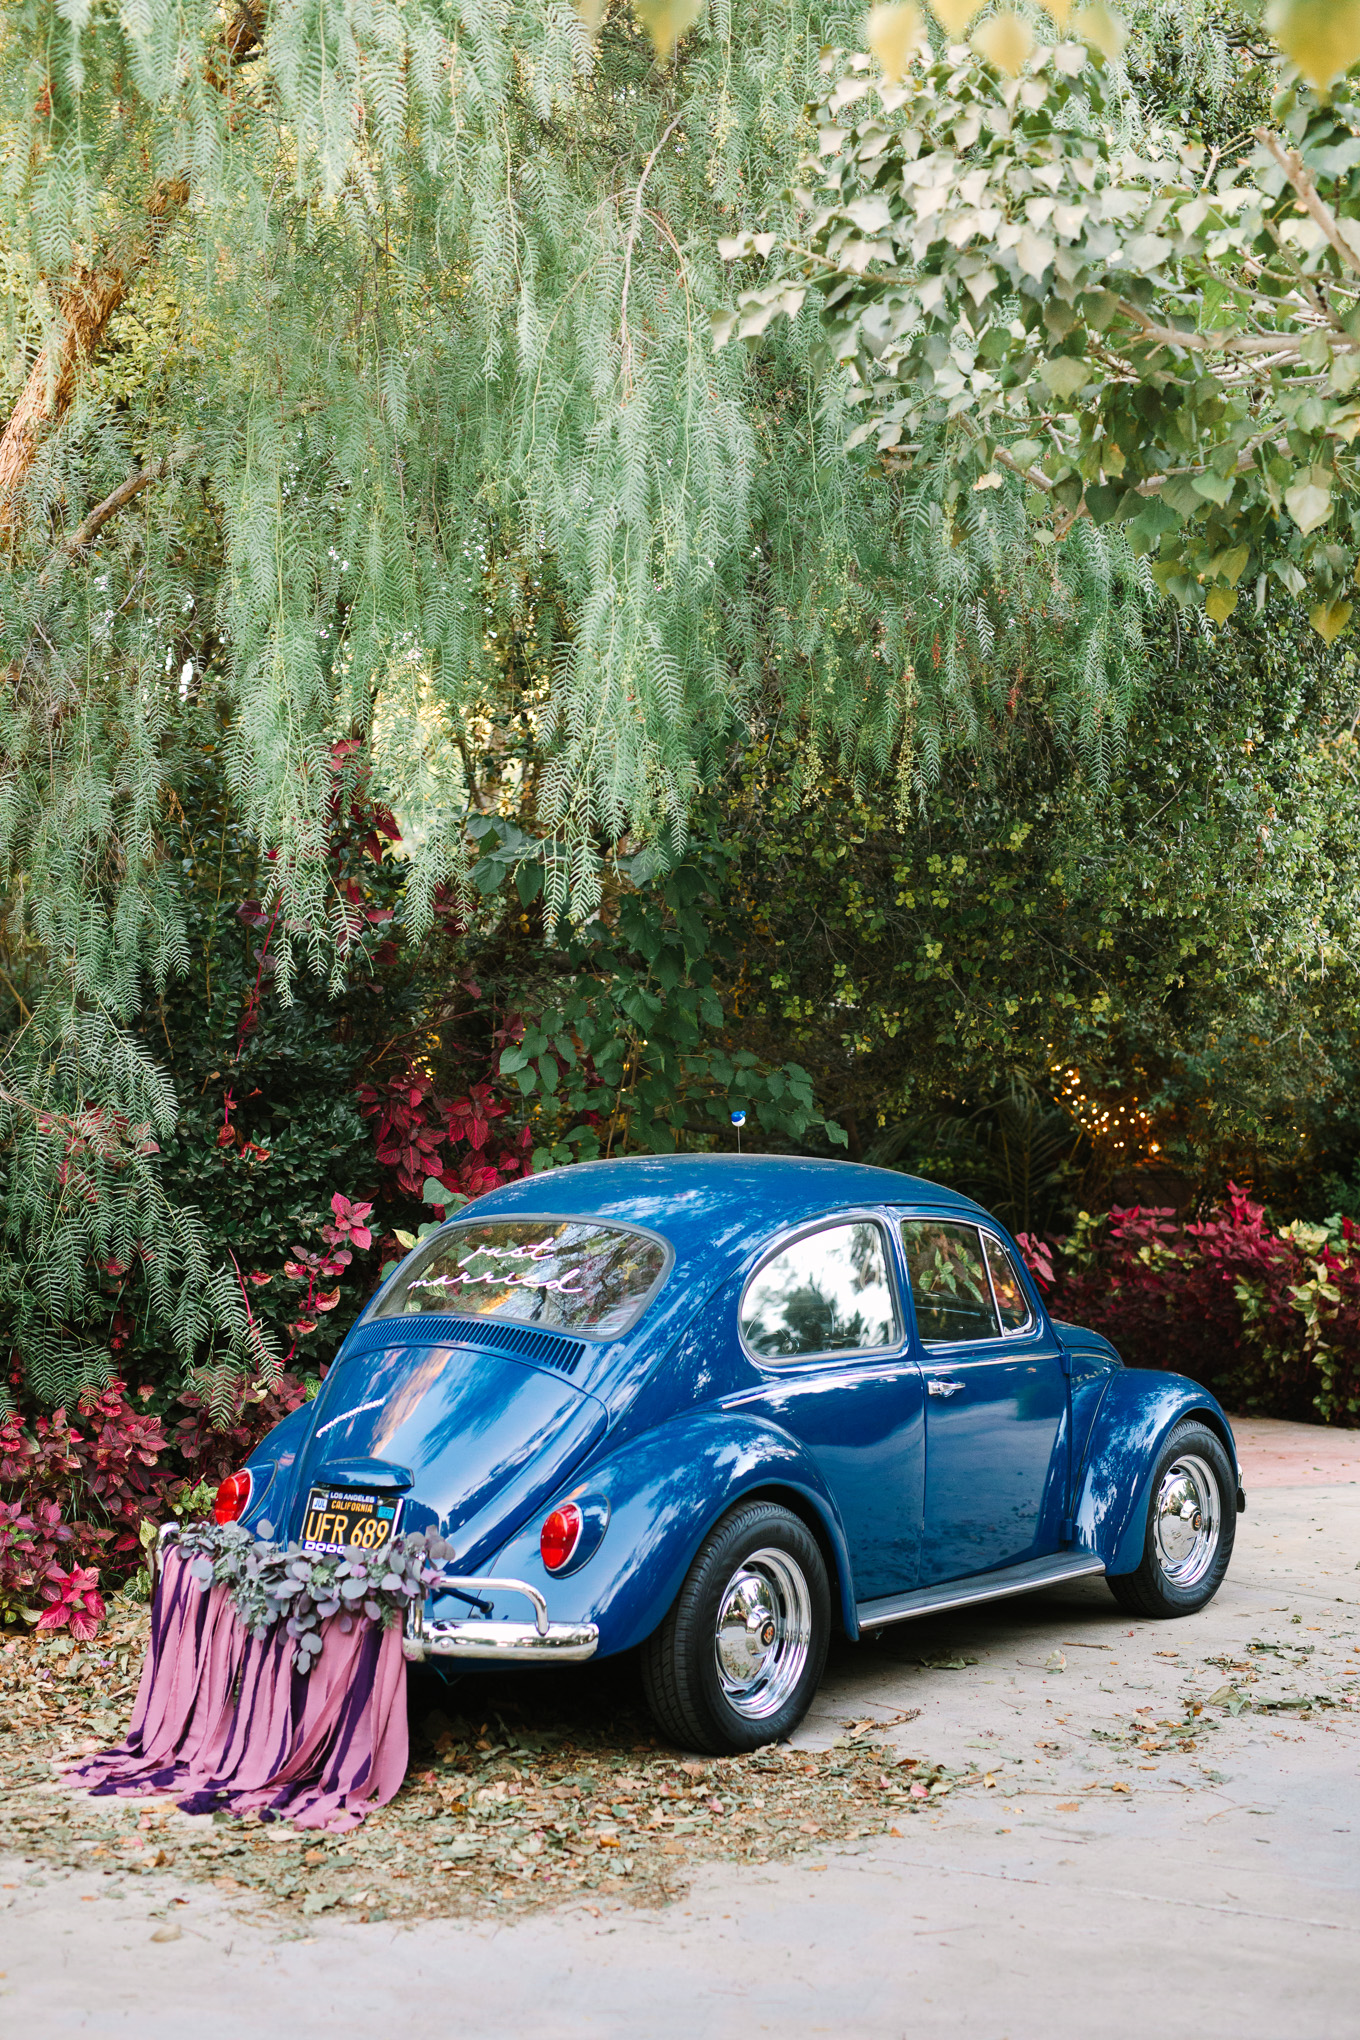 Vintage VW bug at Eden Gardens wedding | Best Southern California Garden Wedding Venues | Colorful and elevated wedding photography for fun-loving couples | #gardenvenue #weddingvenue #socalweddingvenue #bouquetideas #uniquebouquet   Source: Mary Costa Photography | Los Angeles 